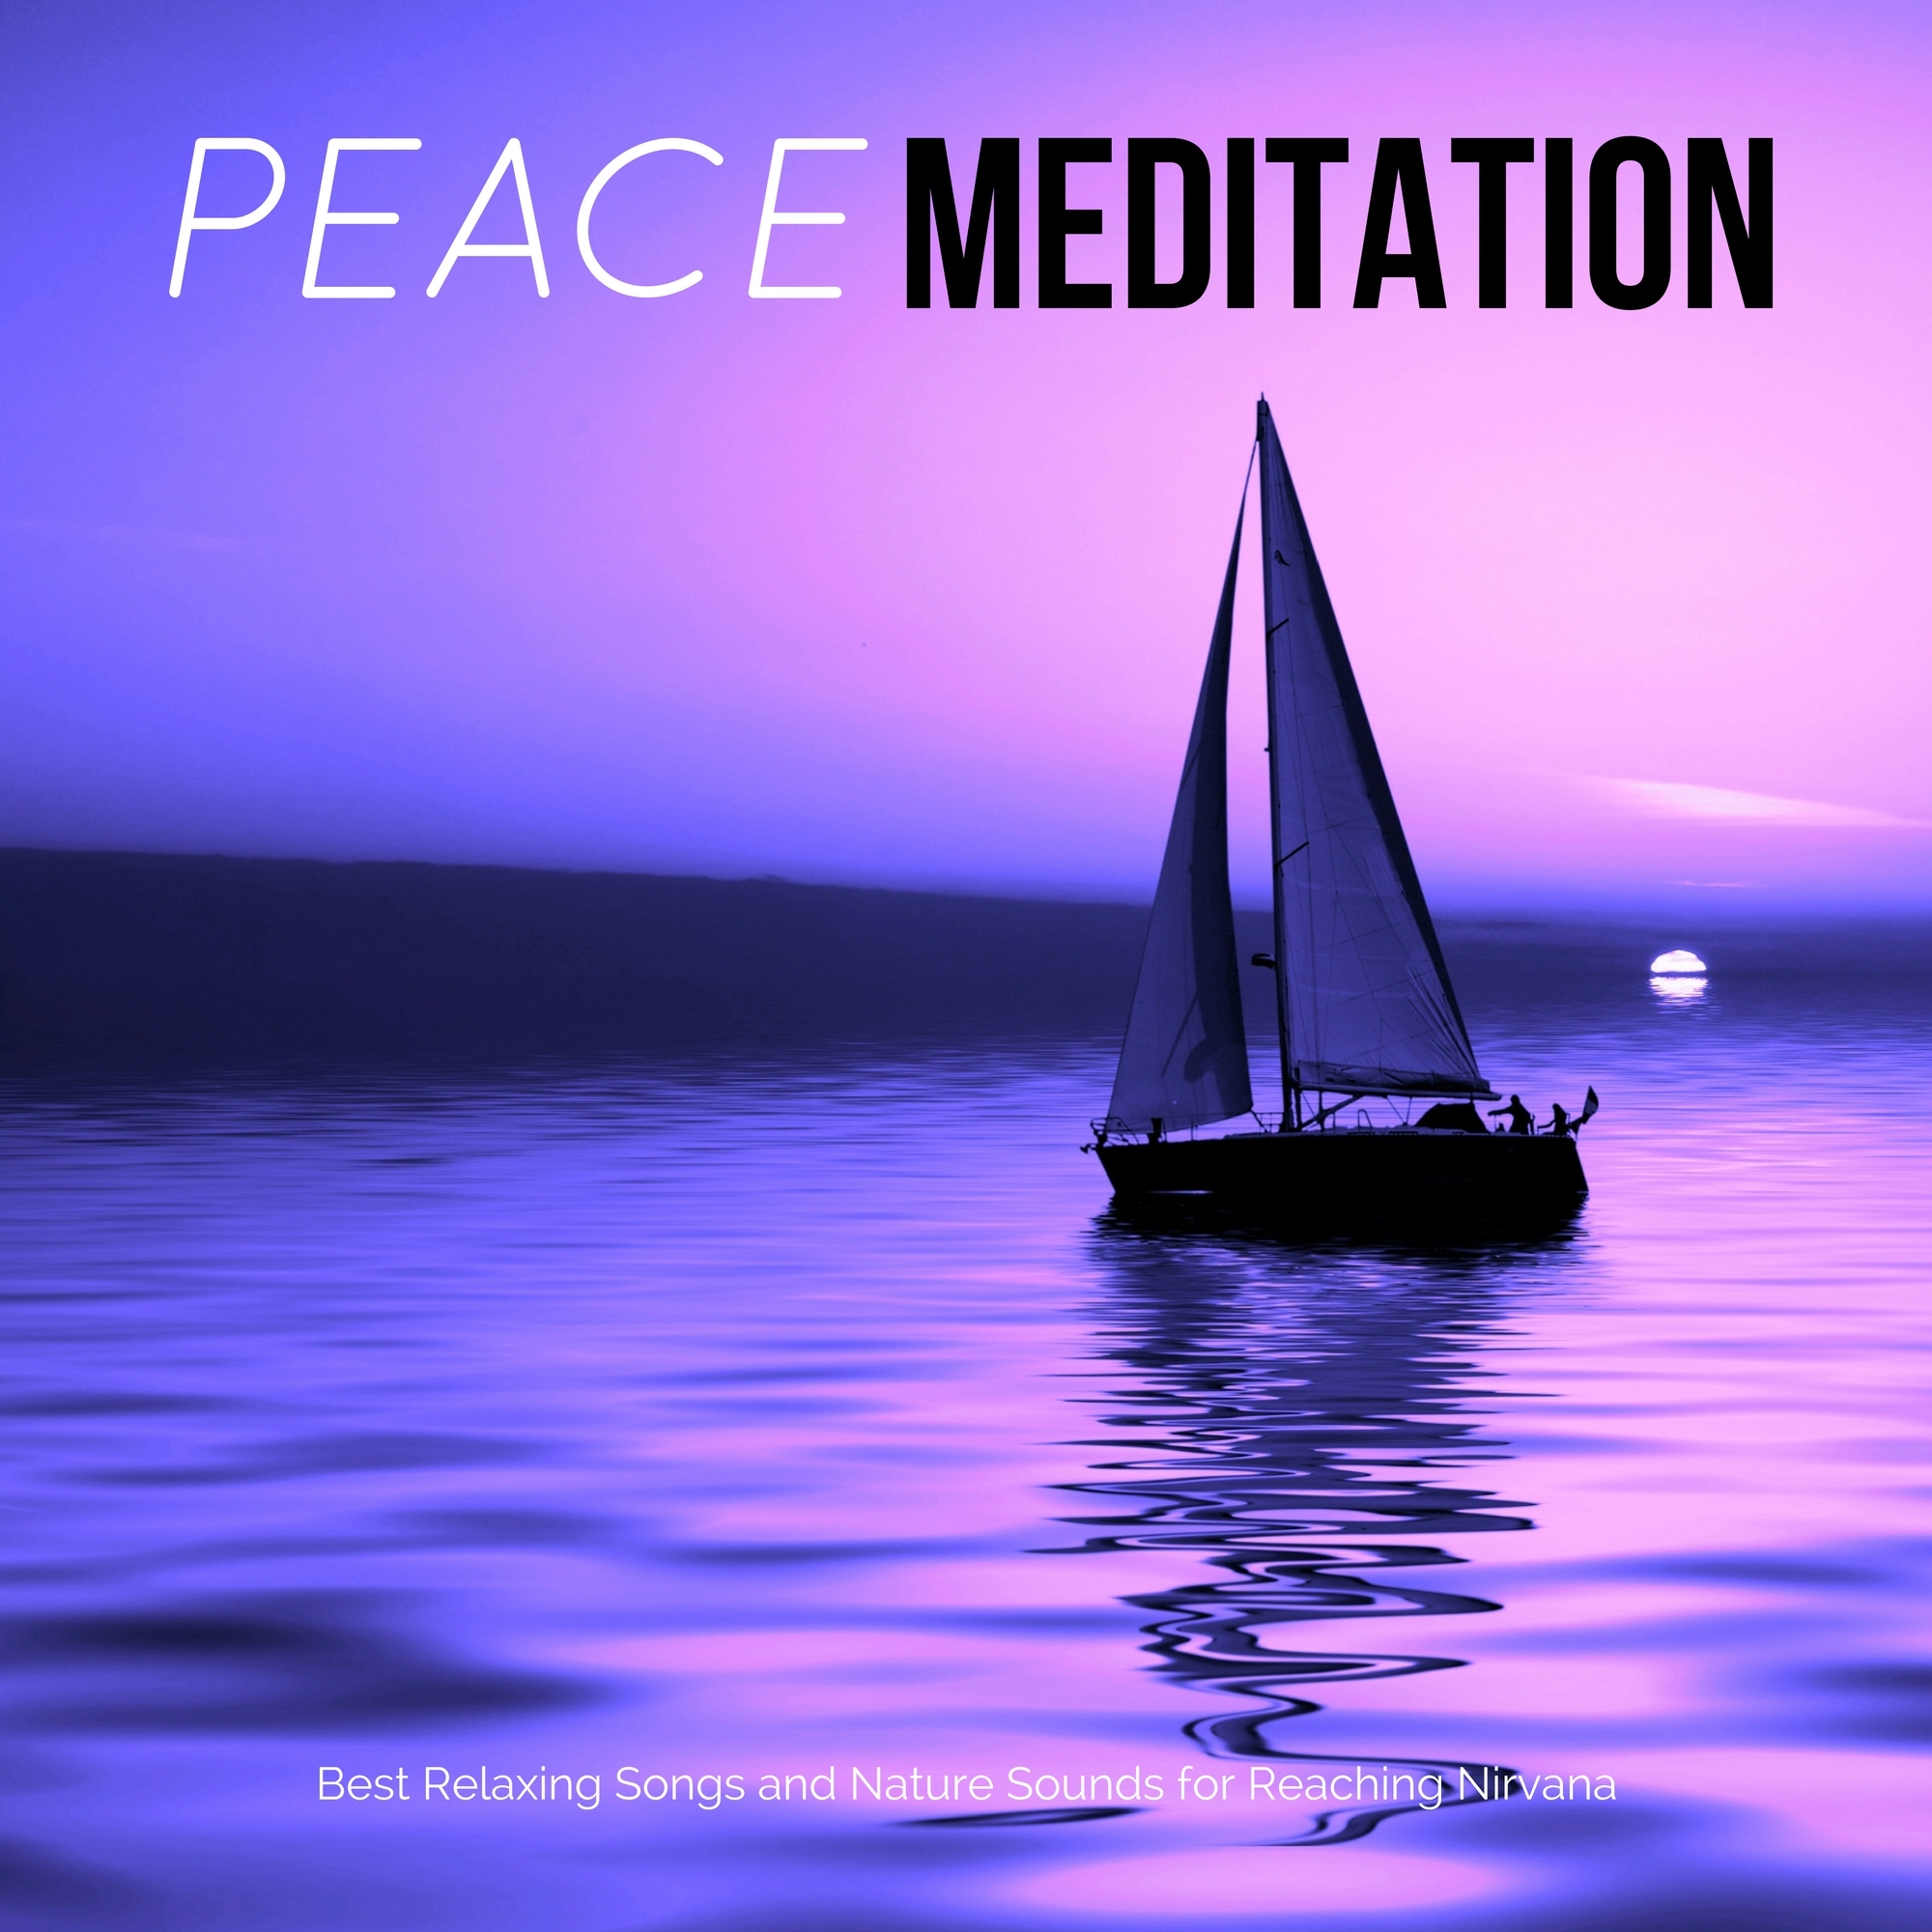 Peace Meditation - Best Relaxing Songs and Nature Sounds for Reaching Nirvana